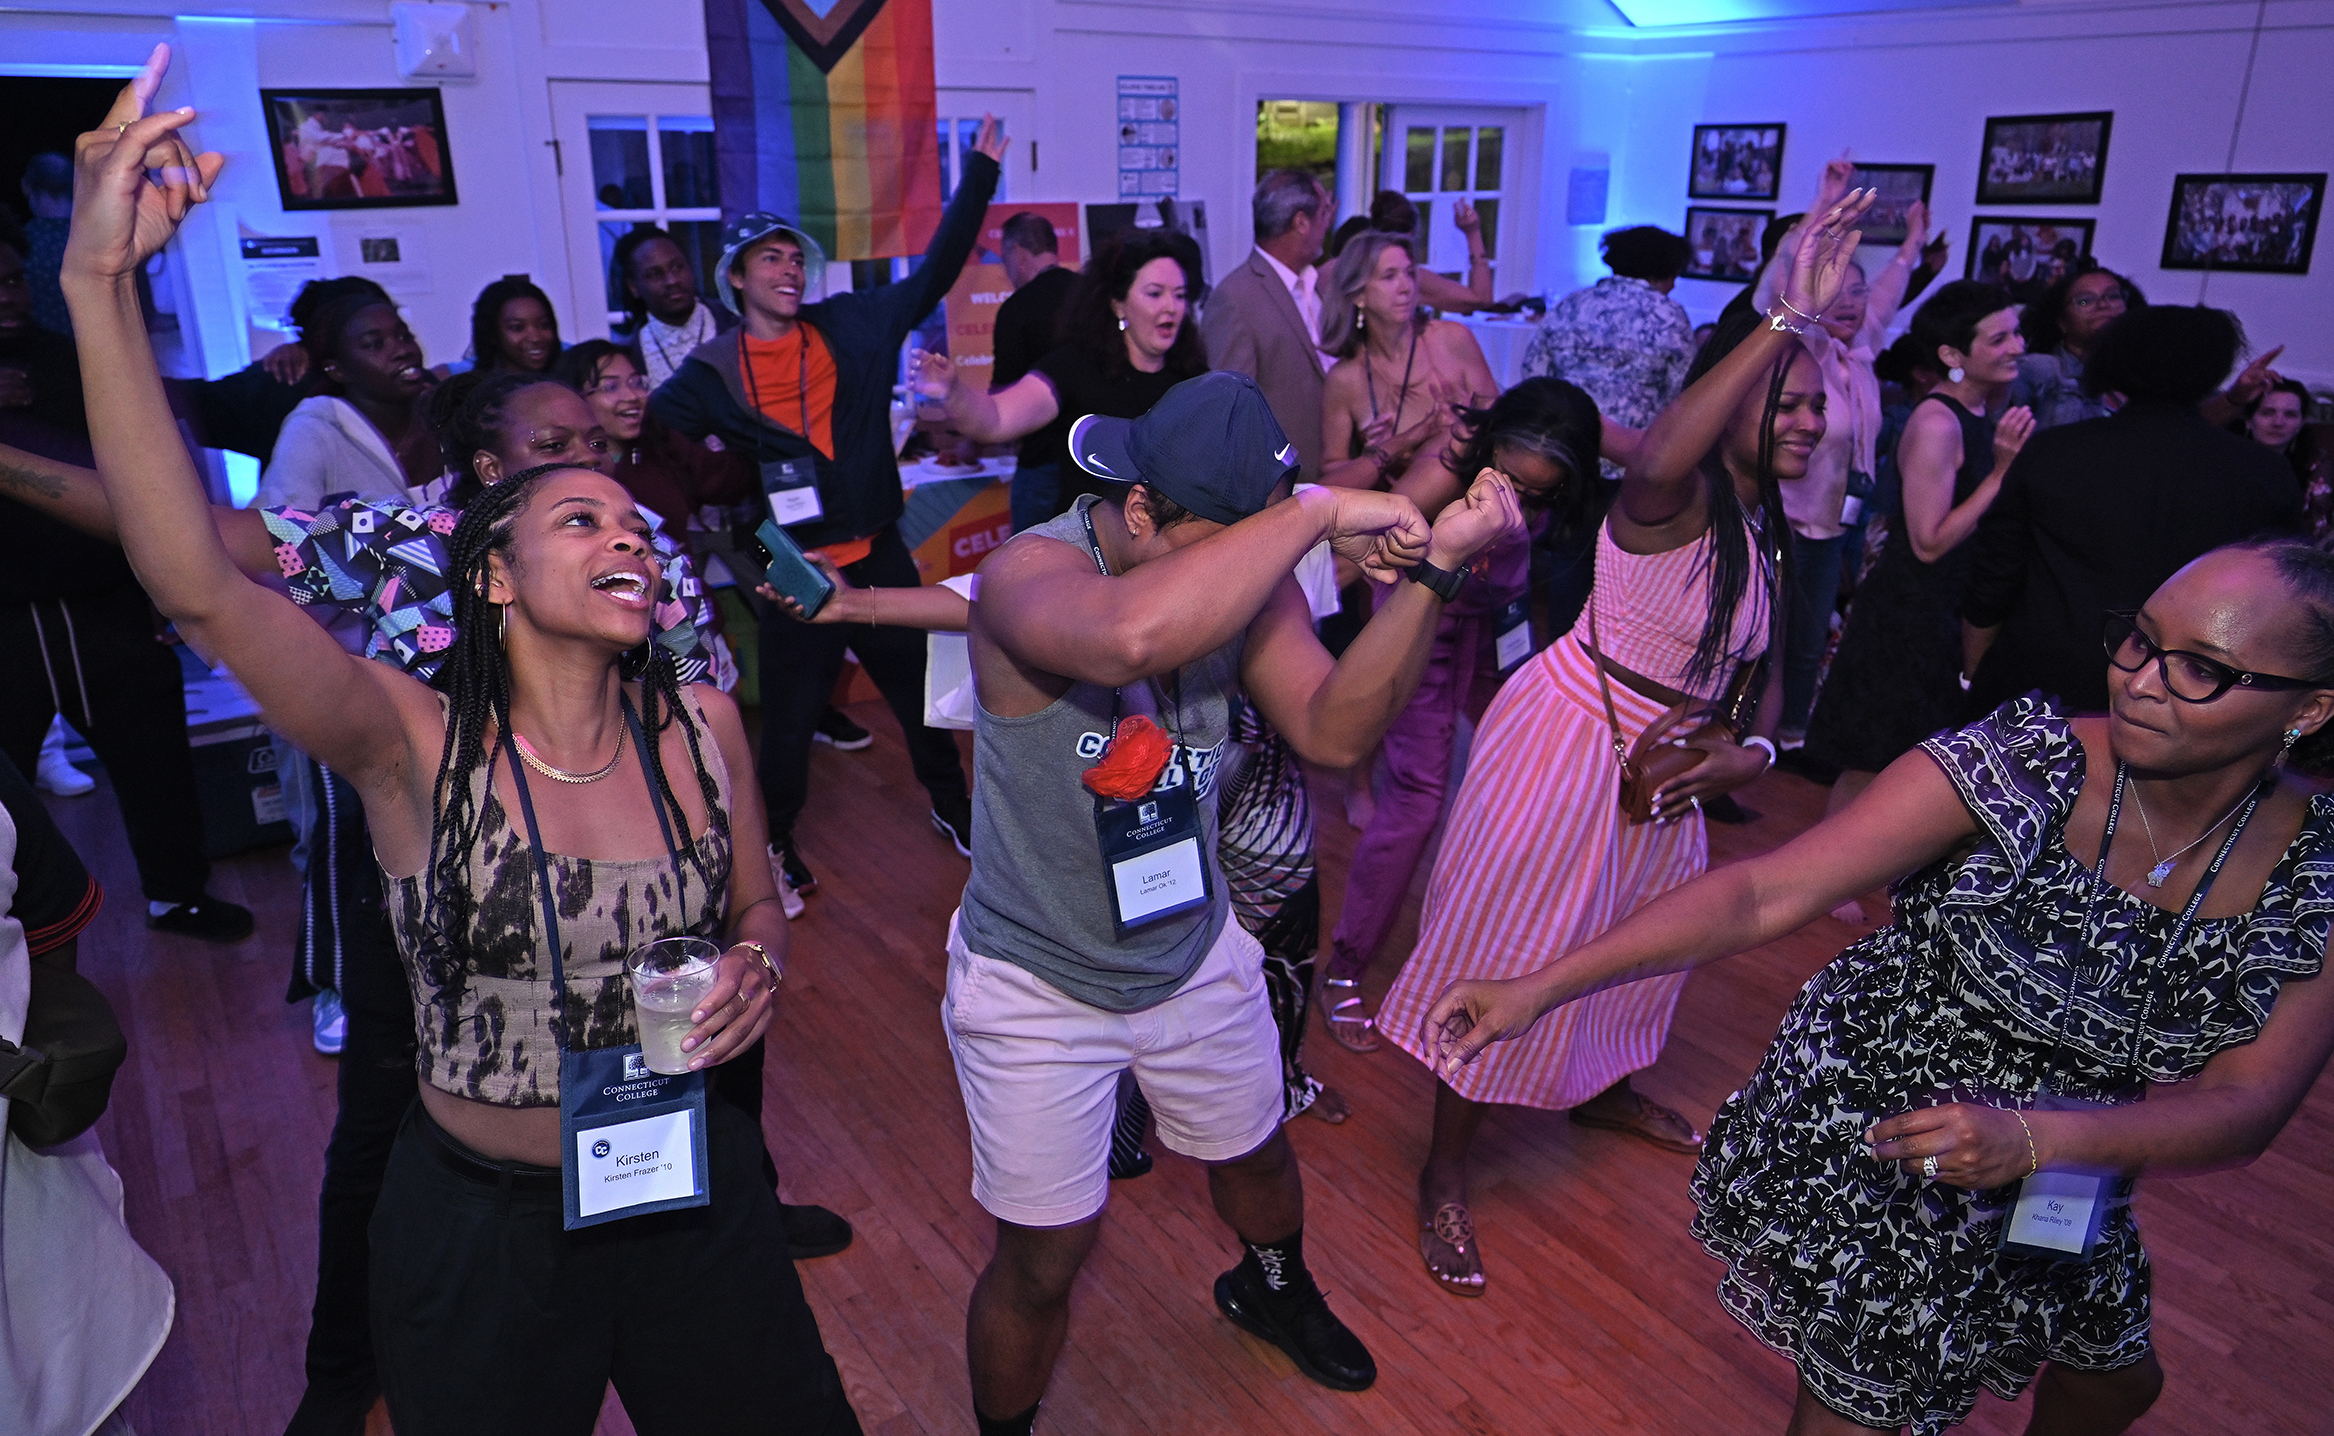 College alumni of color dance together during a reunion event